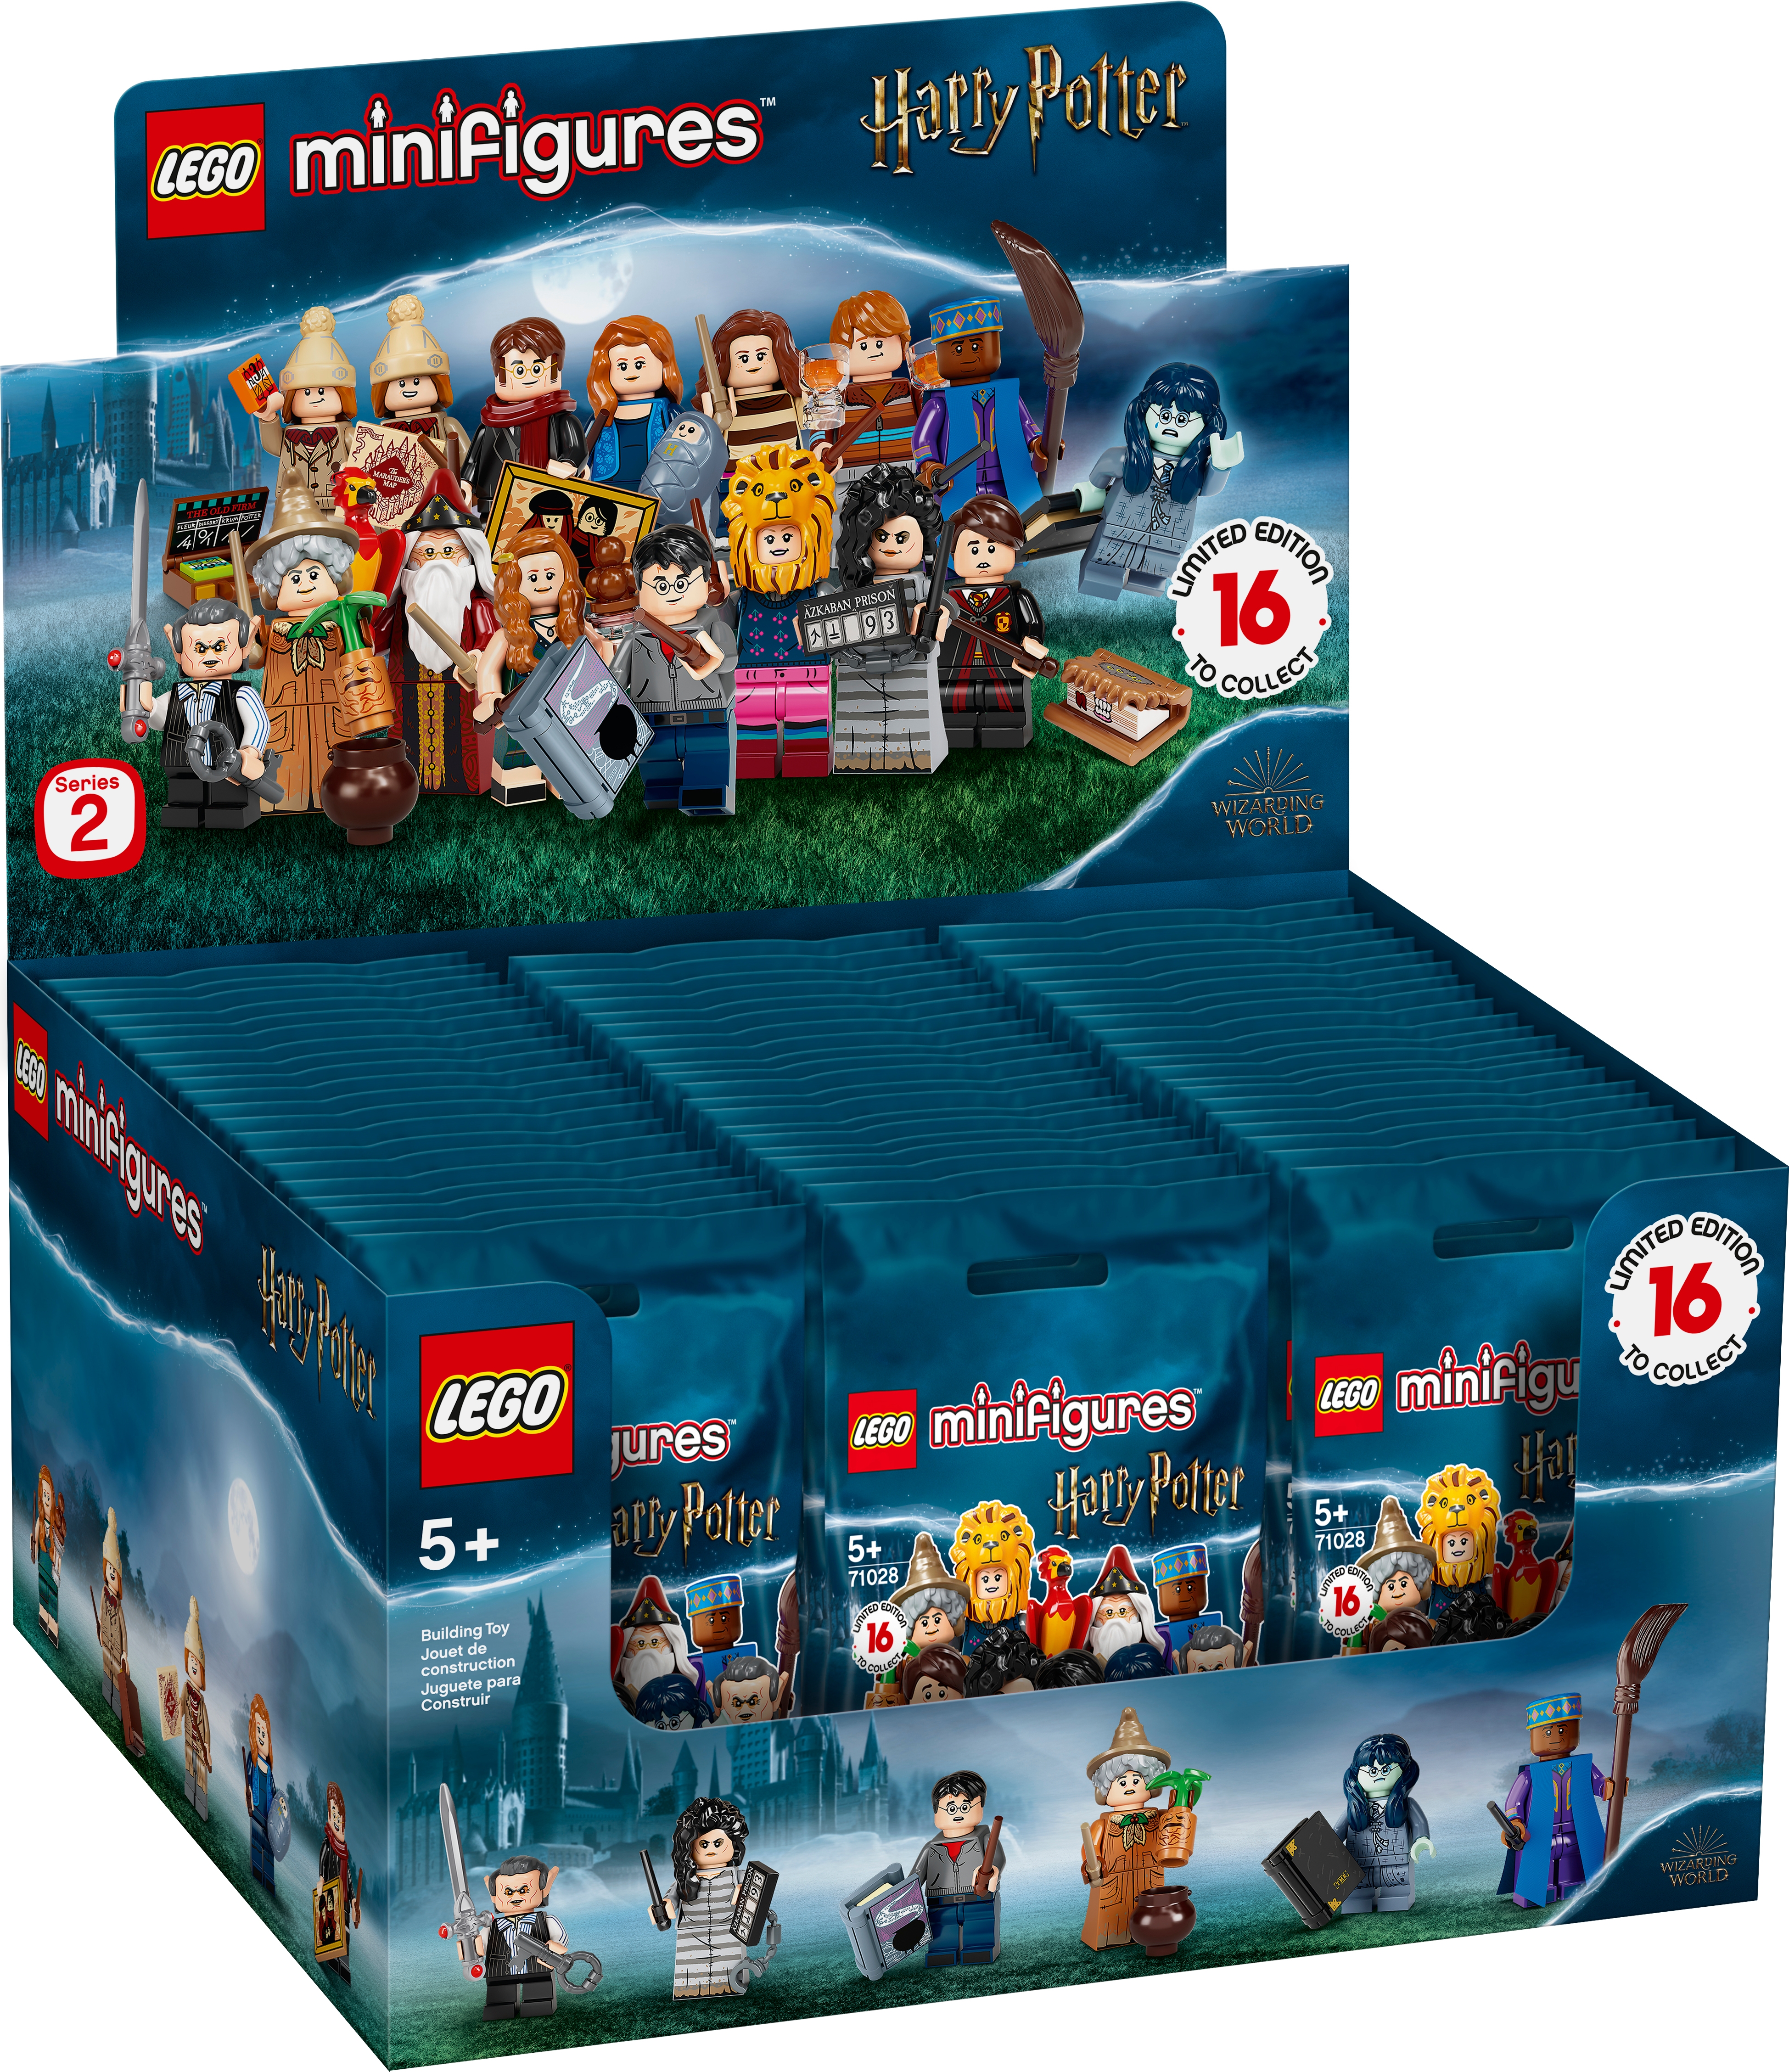 10x LEGO Minifigures Harry Potter Wizarding World Series 2 71028 for sale online 